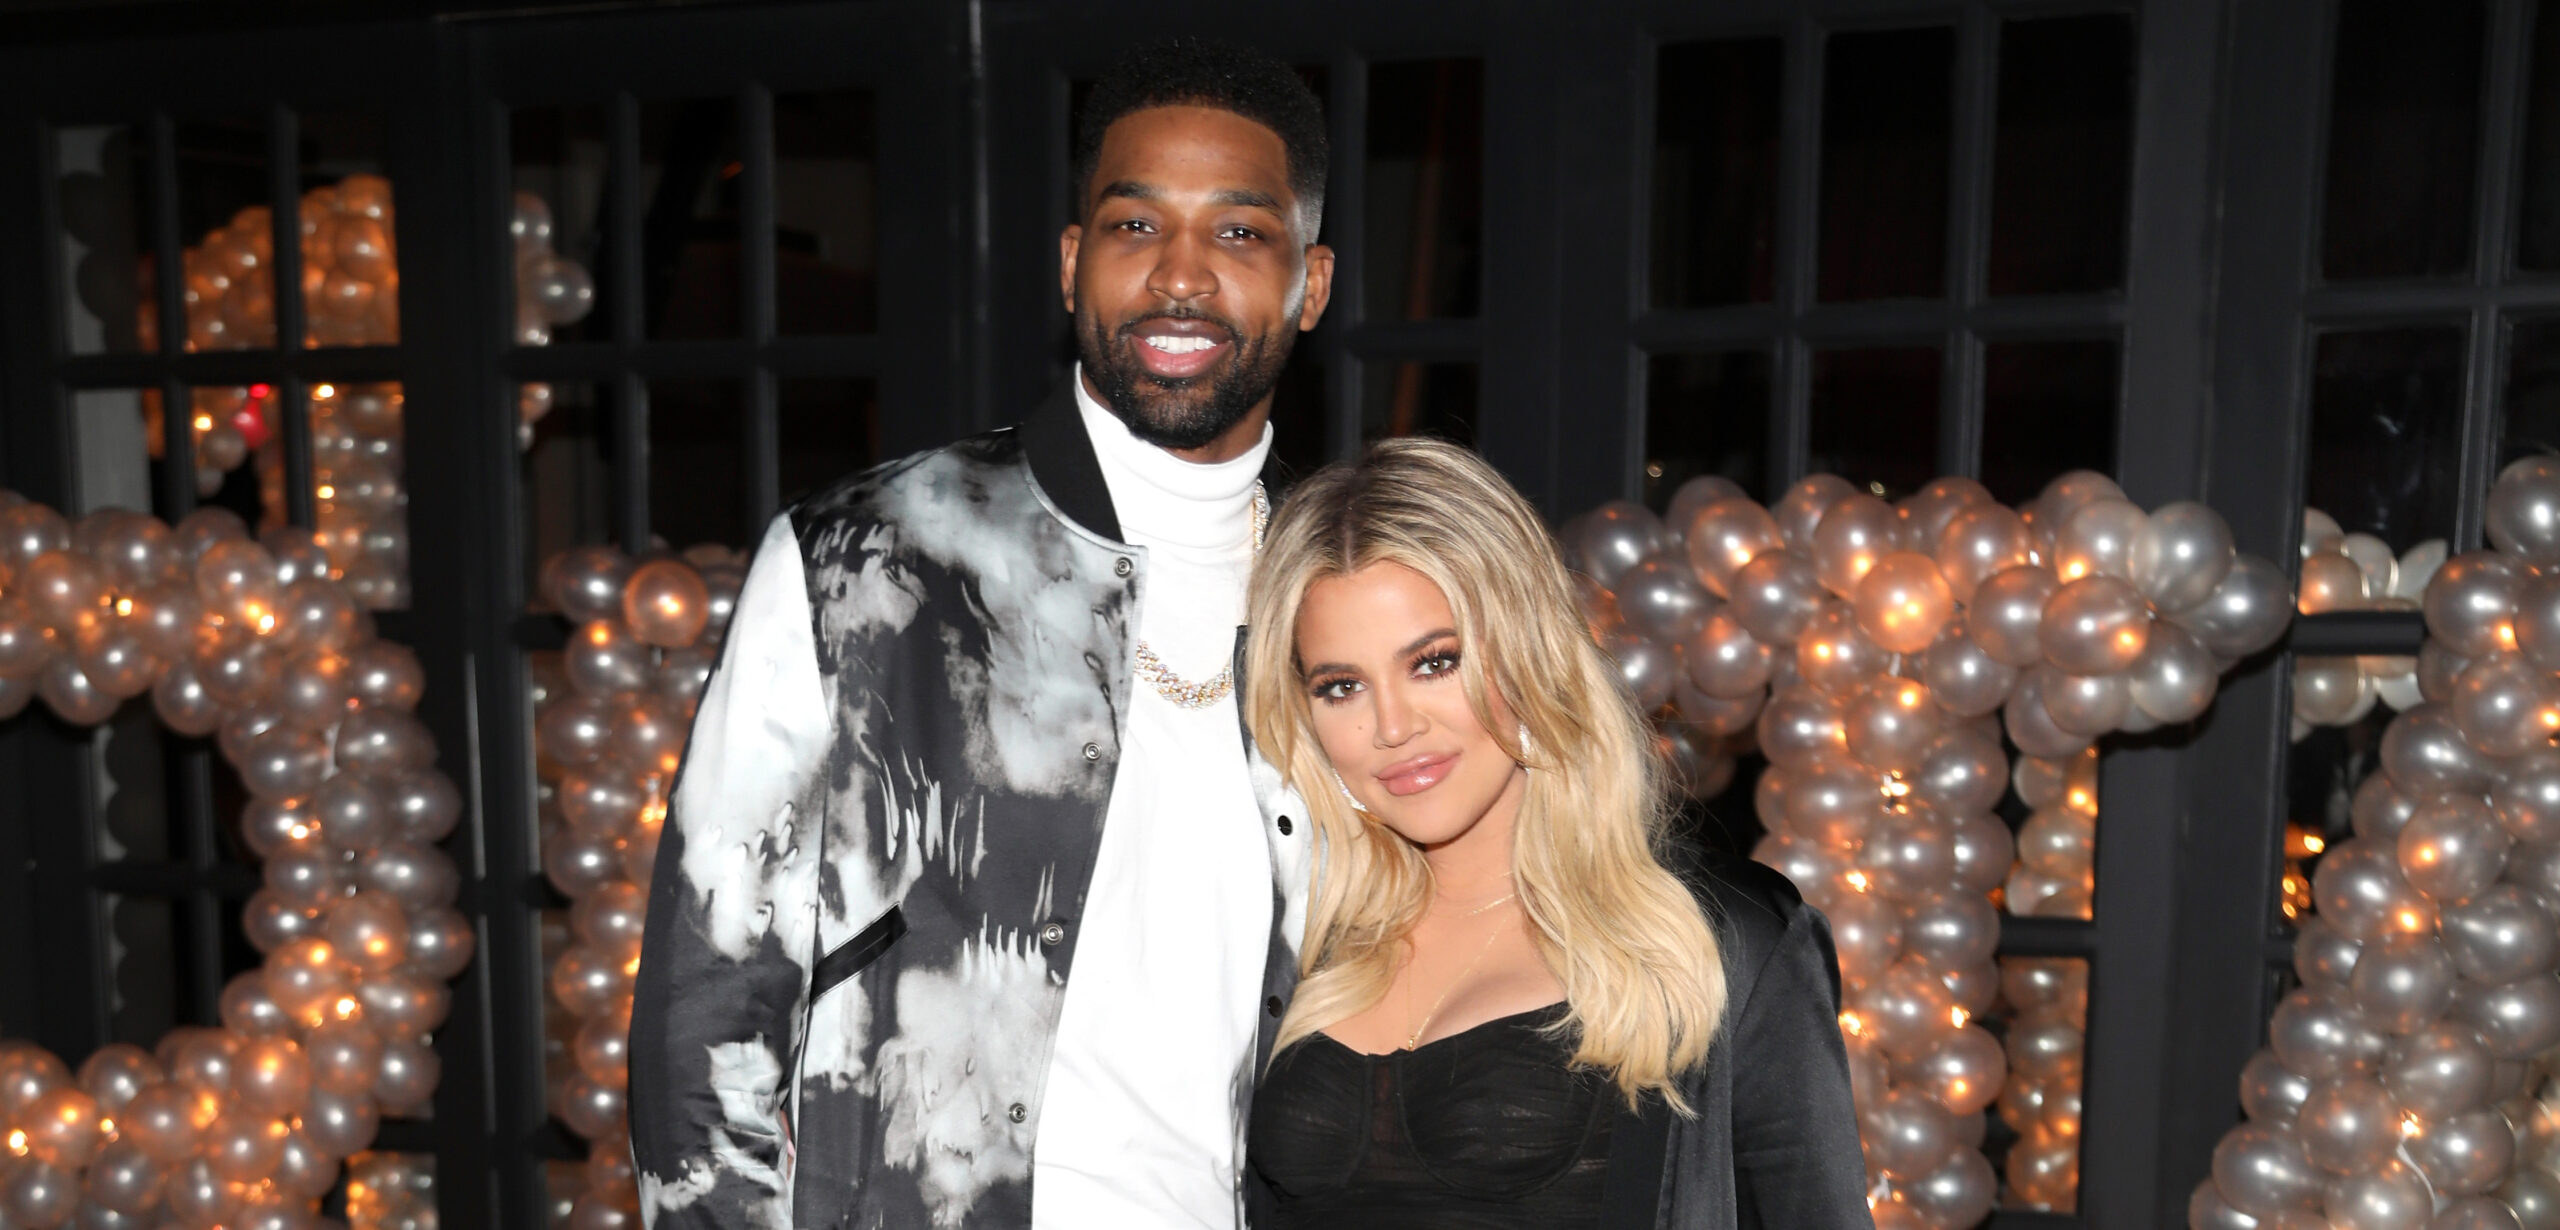 Khloe Kardashian Has 'Difficult Time' After Conception with Tristan Thompson